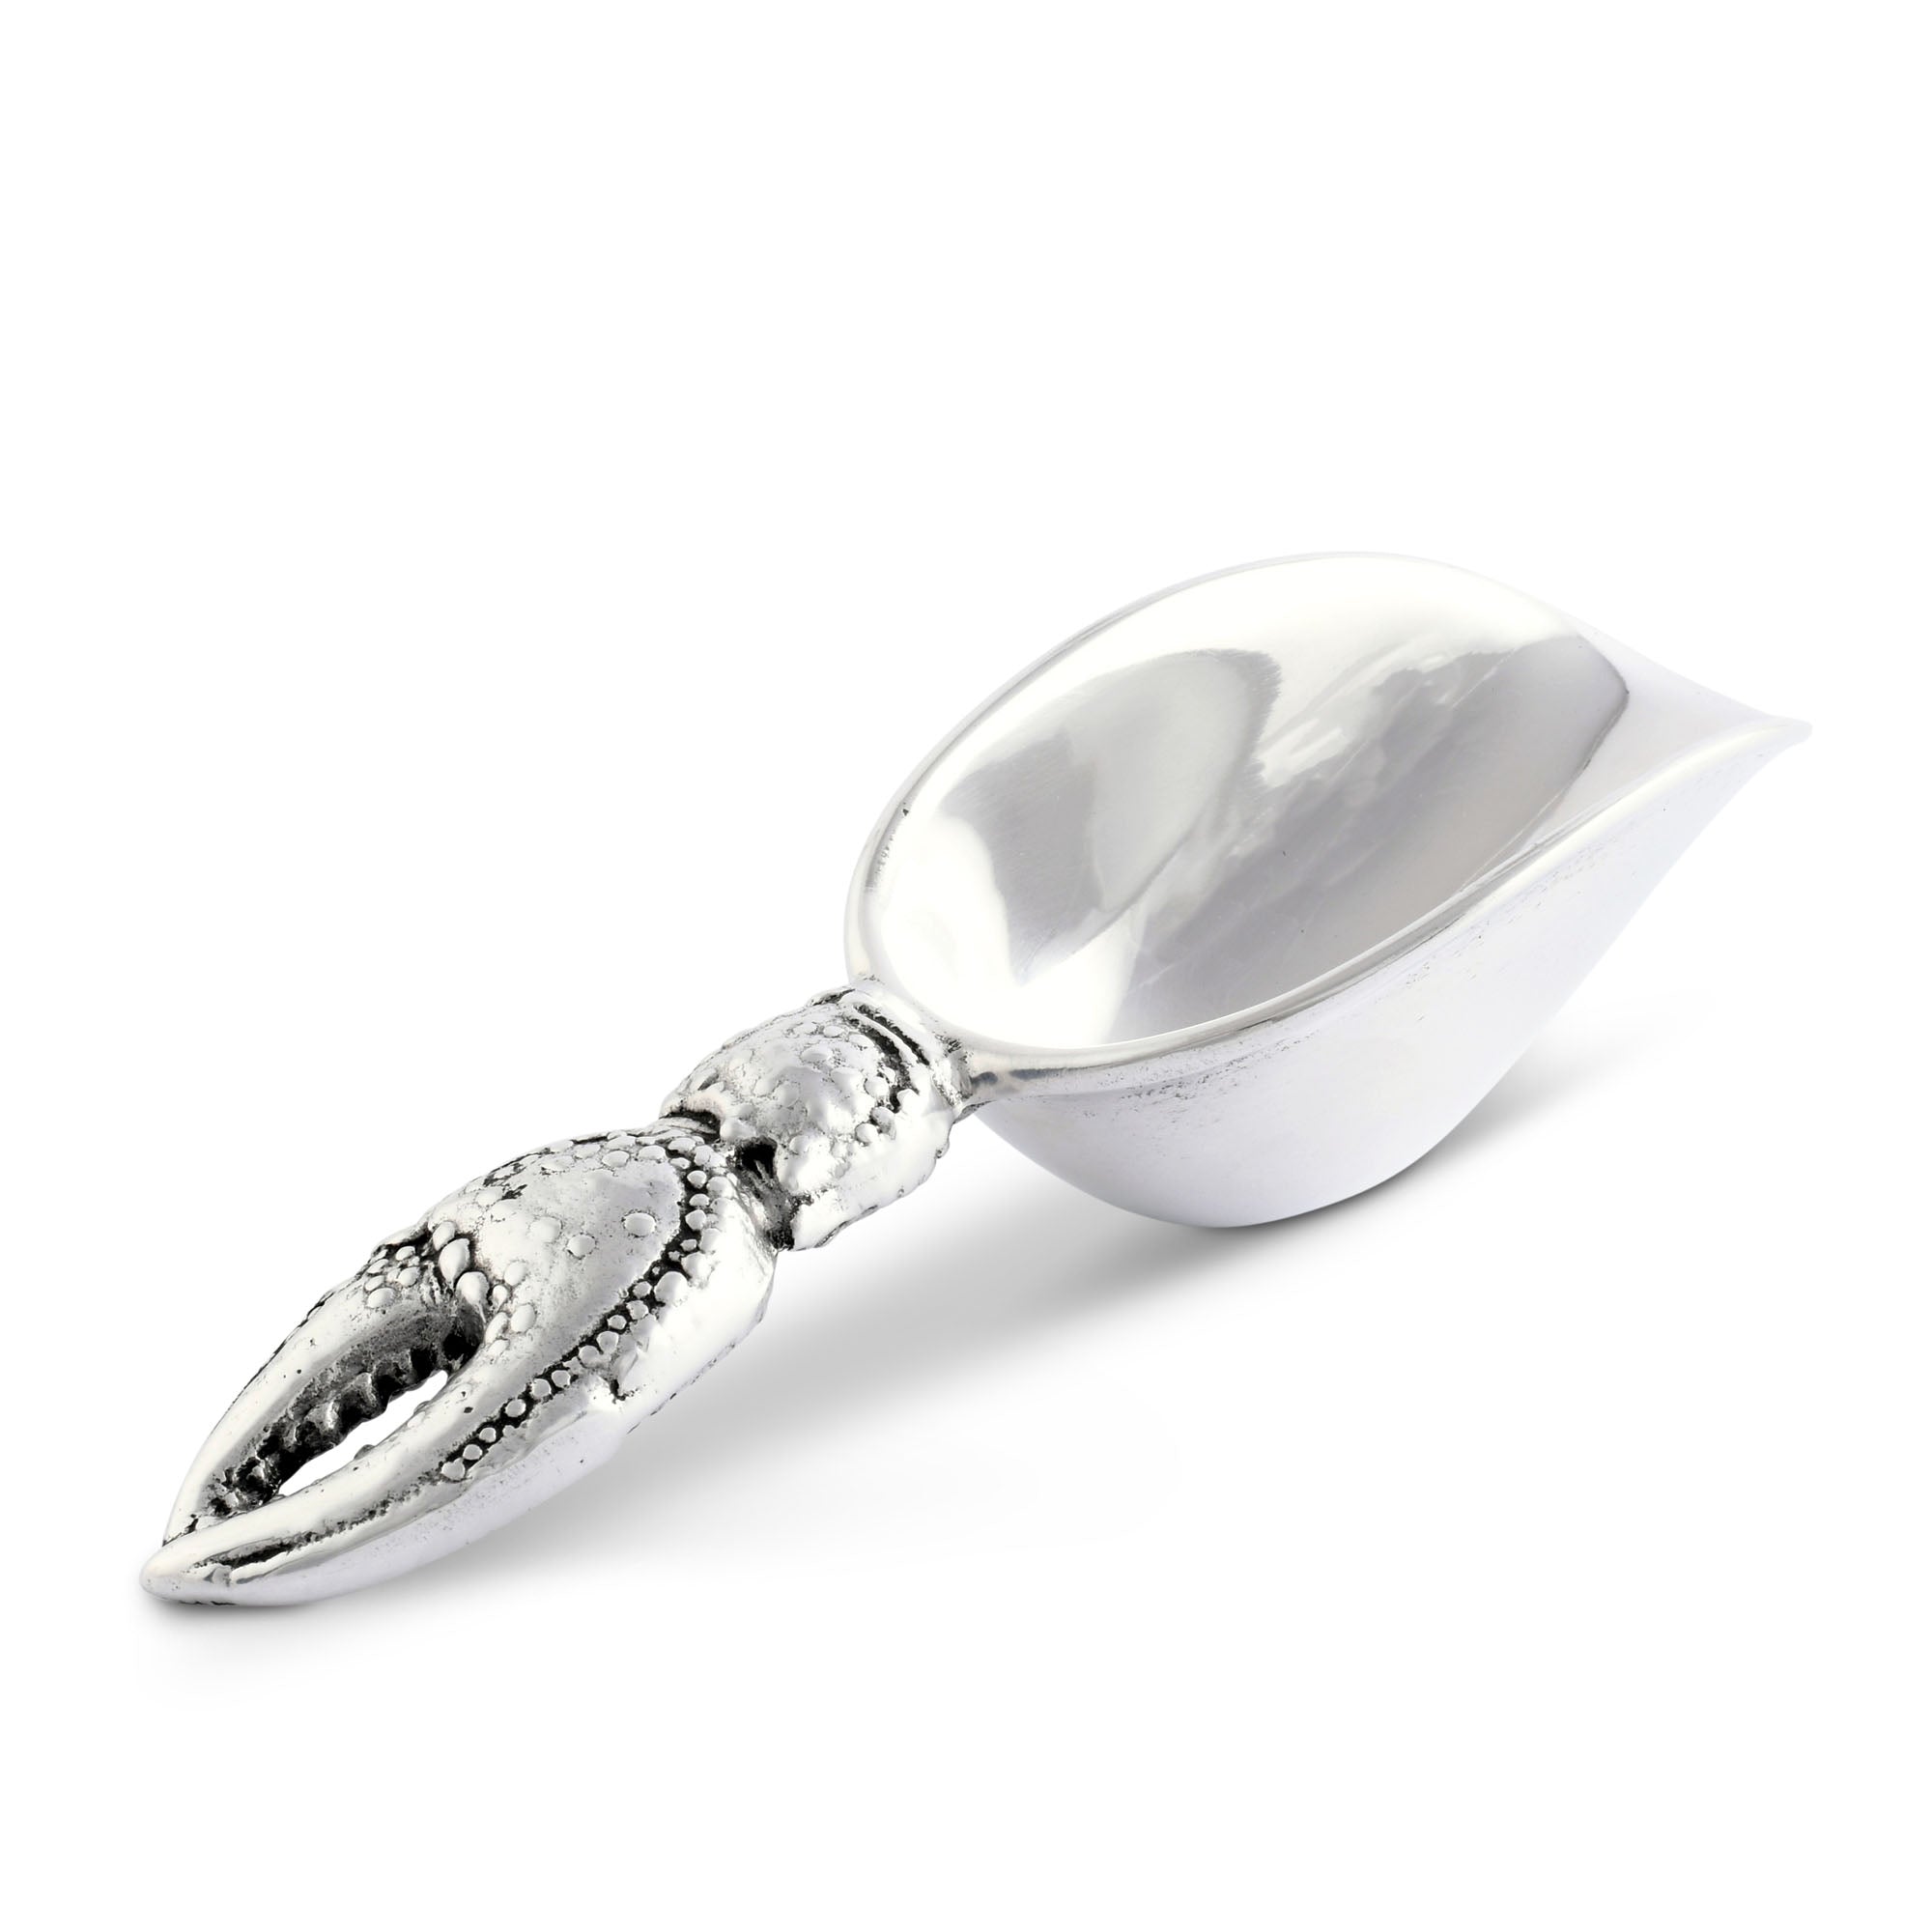 Arthur Court Crab Ice Scoop Product Image